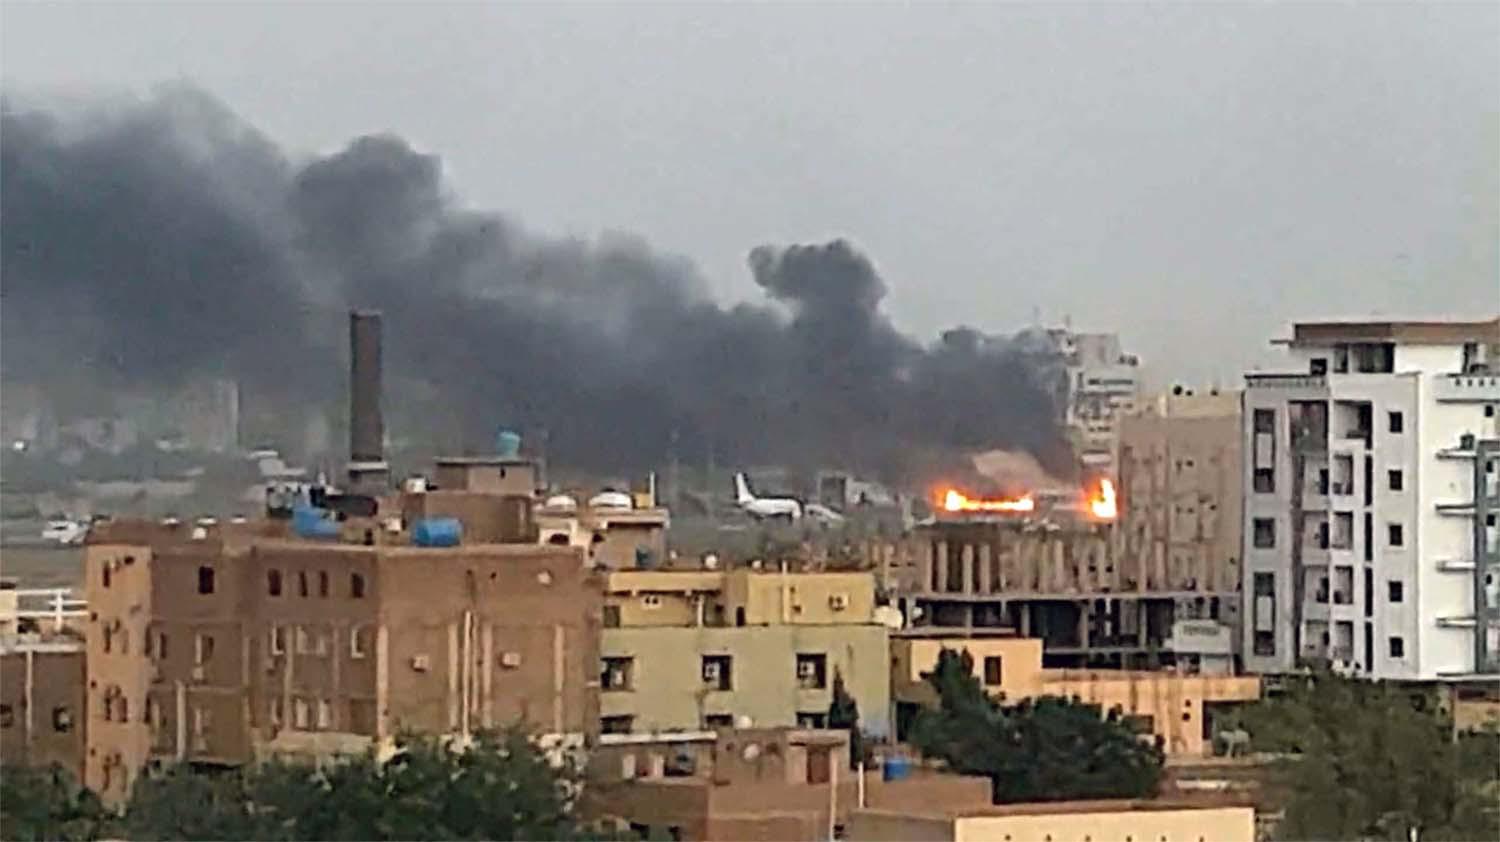 Airstrikes and shelling intensified in parts of Khartoum and Omdurman